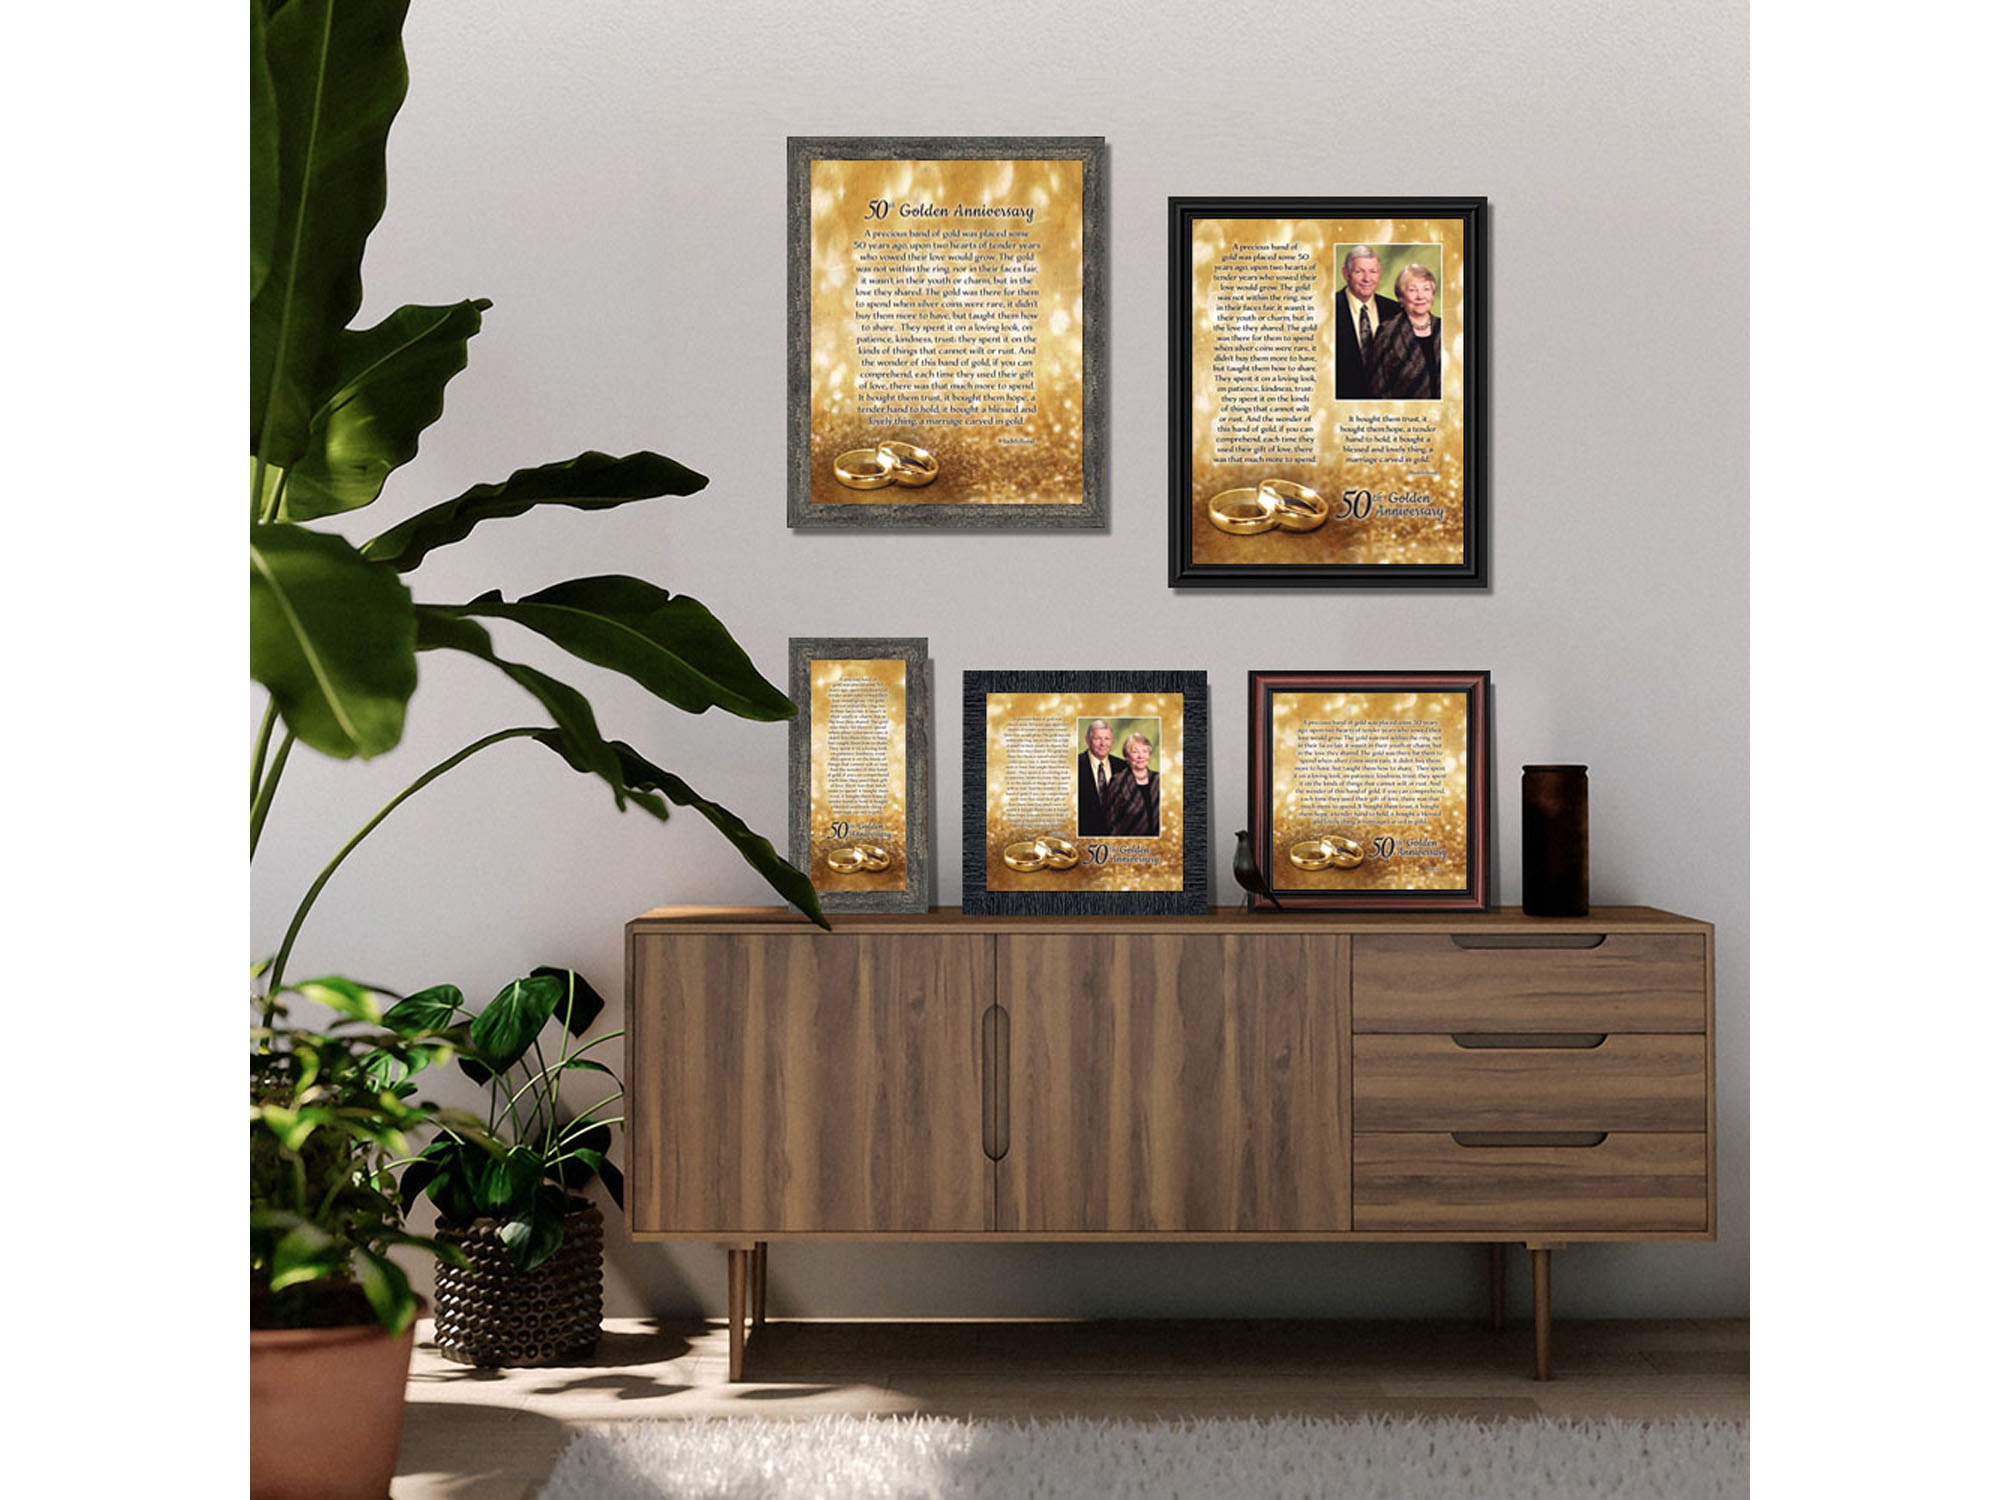 50th Wedding Anniversary Gifts for Parents, 50th Anniversary Decorations for Party, Golden Anniversary 50 Year Gifts, 50th Anniversary Gifts for Couples, Gift with 50th Anniversary Card 8608B - image 4 of 8